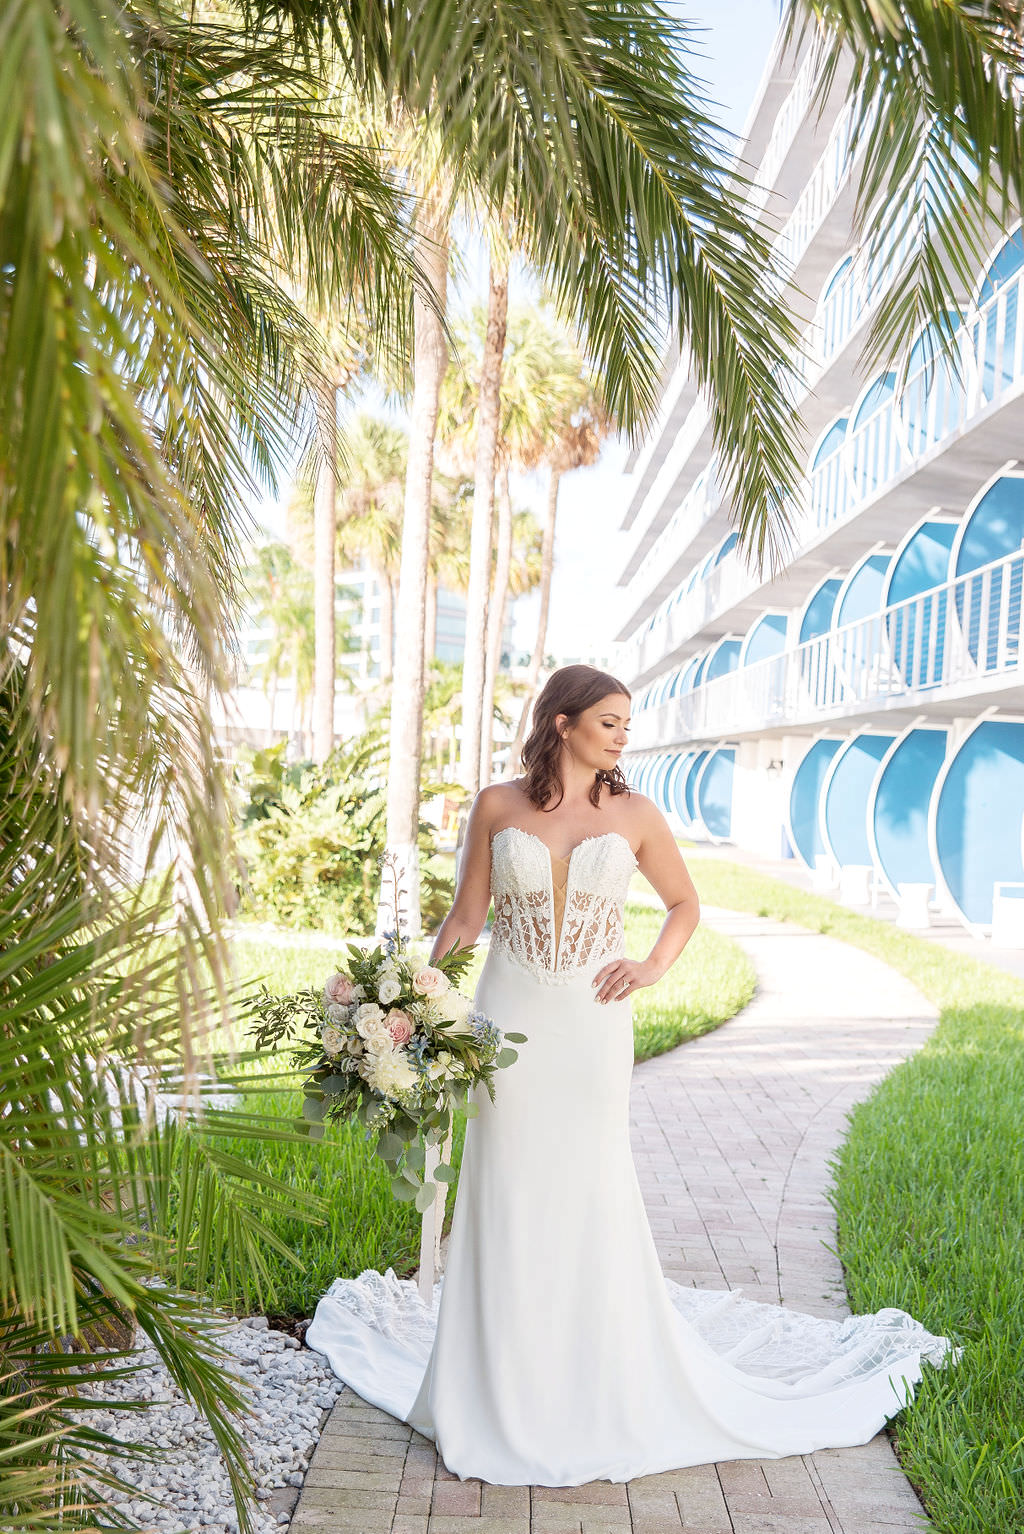 Bride Outdoor Portrait in Strapless Deep V-Neck Illusion and Lace wedding Dress with Organic Greenery, Blush Pink, Ivory, and Blue Wedding Floral Bouquet | Tampa Wedding Photographer Kristen Marie Photography | Tampa Wedding Dress Shop Truly Forever Bridal | Hair and Makeup Michele Renee the Studio